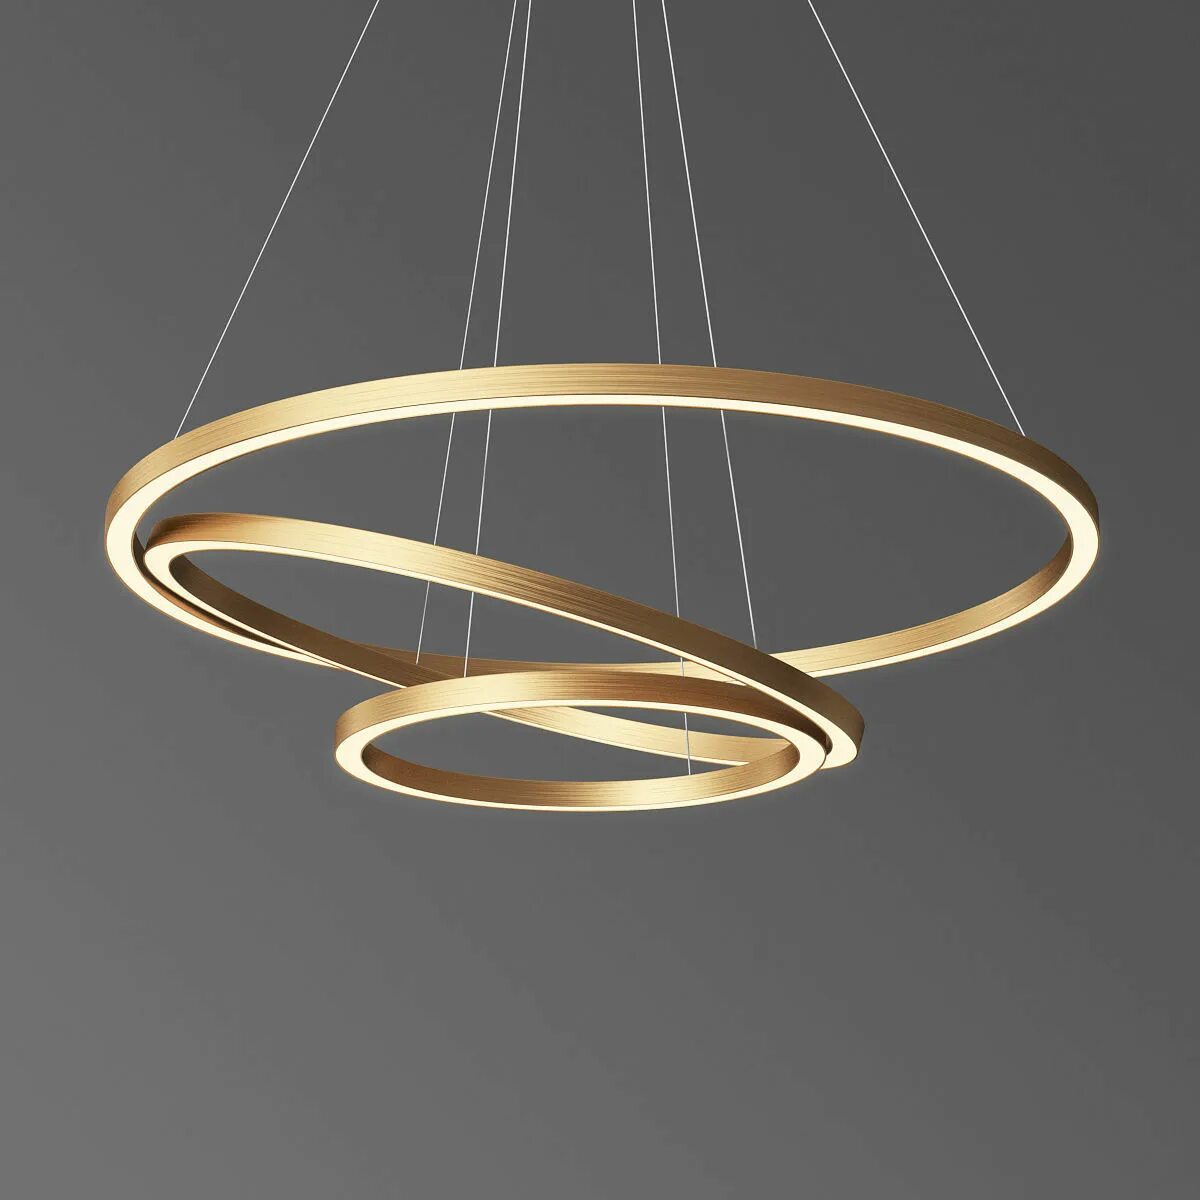 Люстра led 2-Ring Chandelier Золотая. Люстра led 3-Ring Chandelier Золотая. Люстра Ring horizontal Glass Chandelier. Люстра Saturno Gold d80 by Baroncelli. Rings светильники